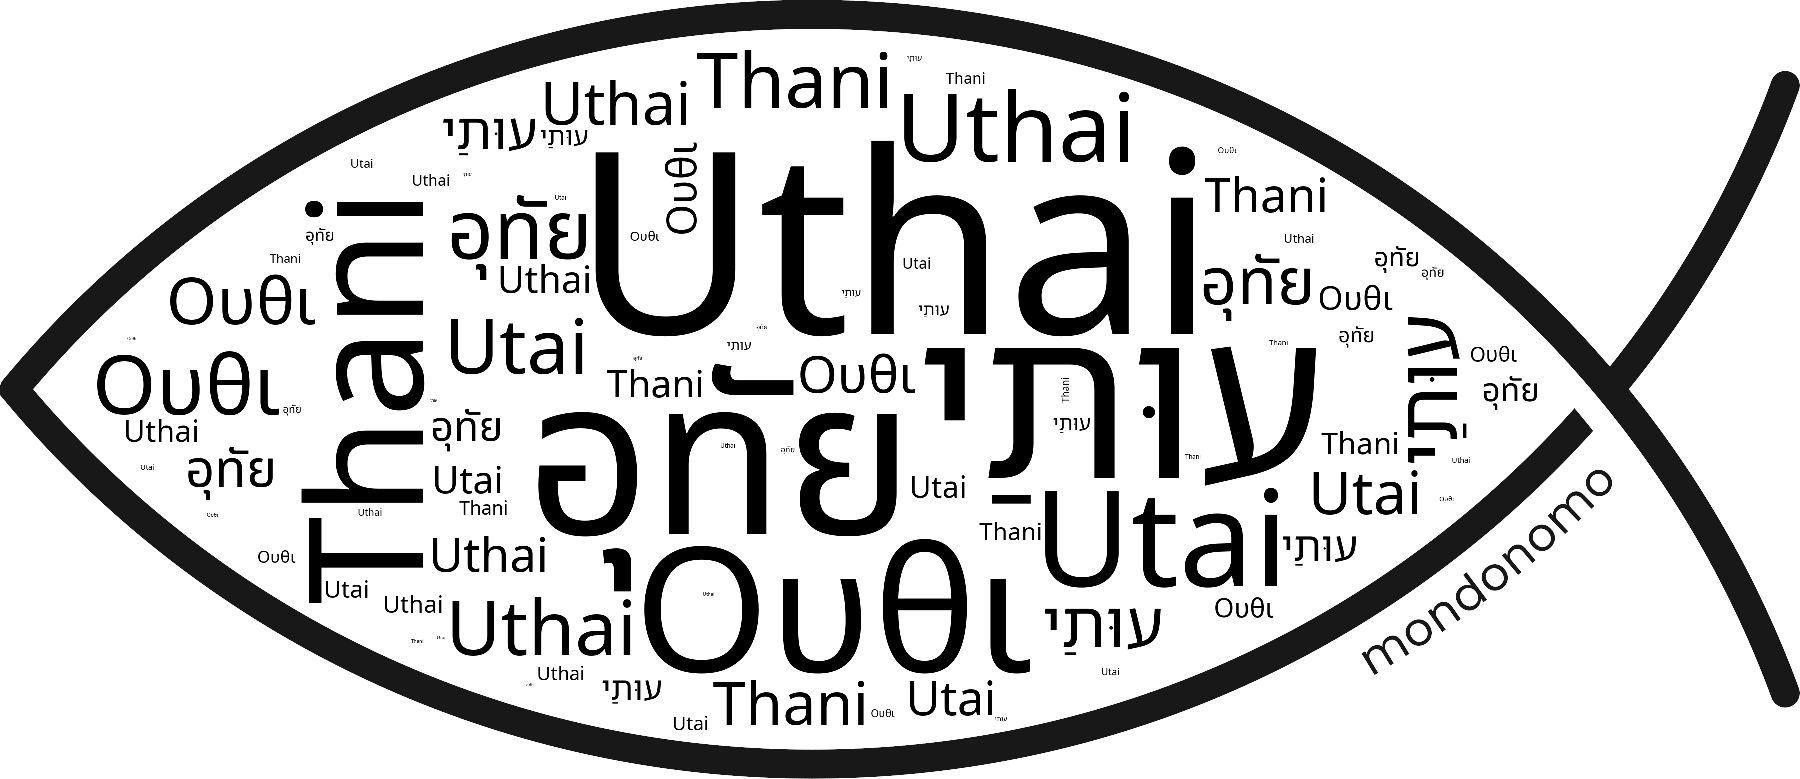 Name Uthai in the world's Bibles